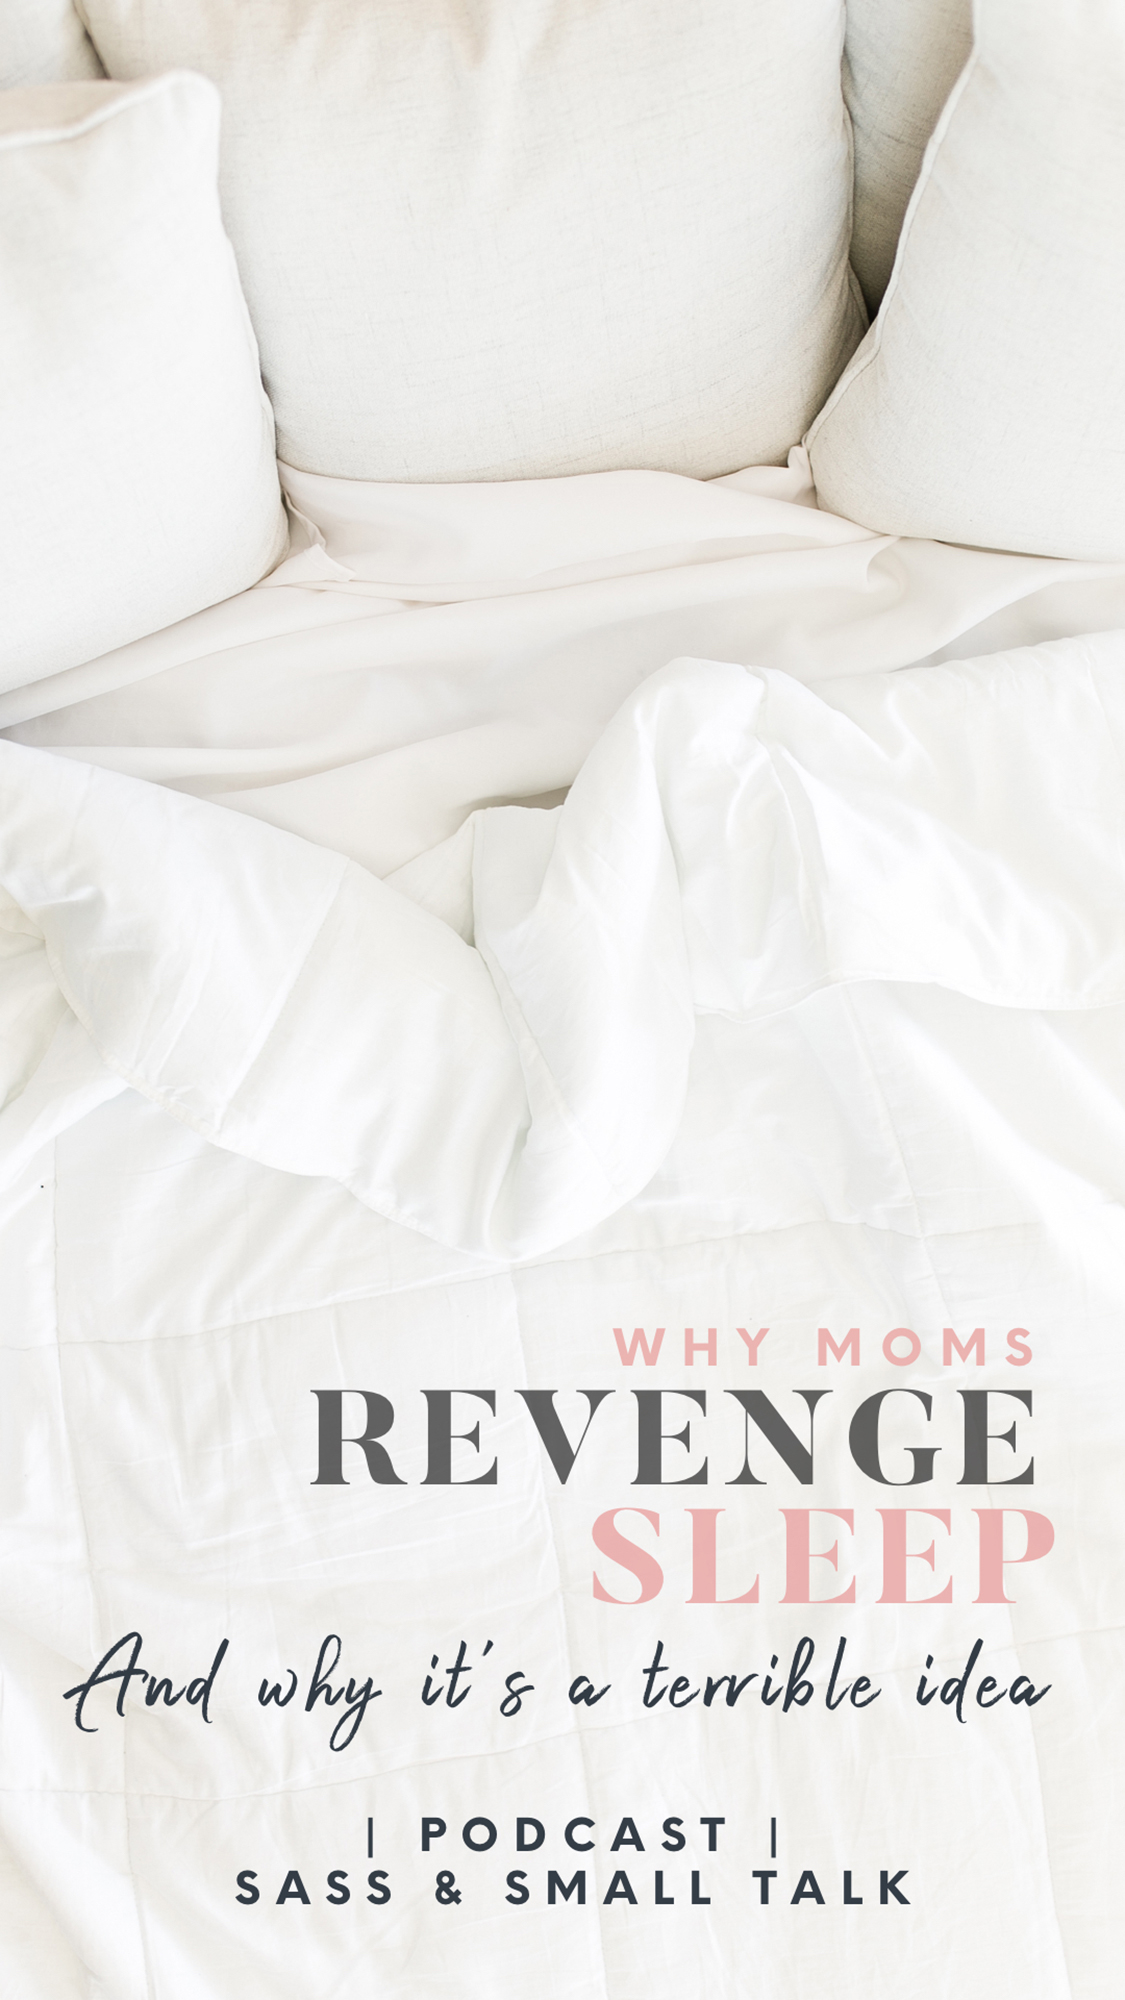 WHY MOMS REVENGE SLEEP - AND WHY IT'S A TERRIBLE IDEA www.sassandsmalls.com